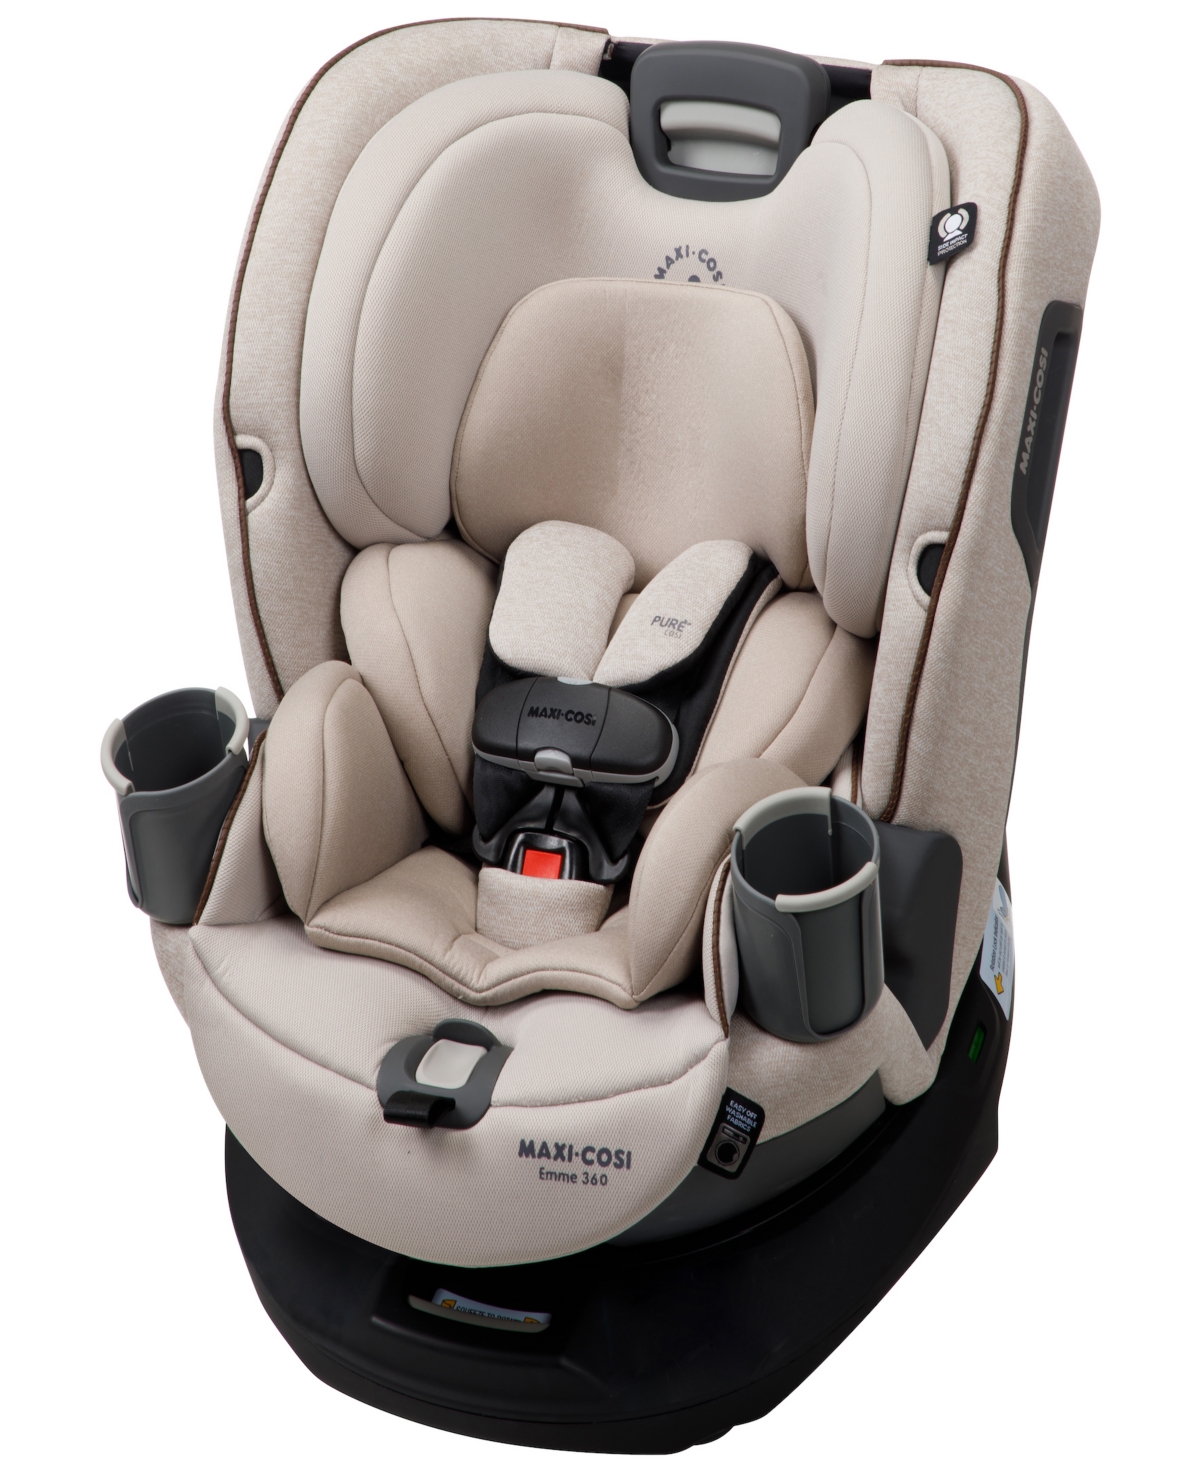 Maxi-cosi Baby Girls And Boys Emme Convertible Car Seat In Desert Wonder